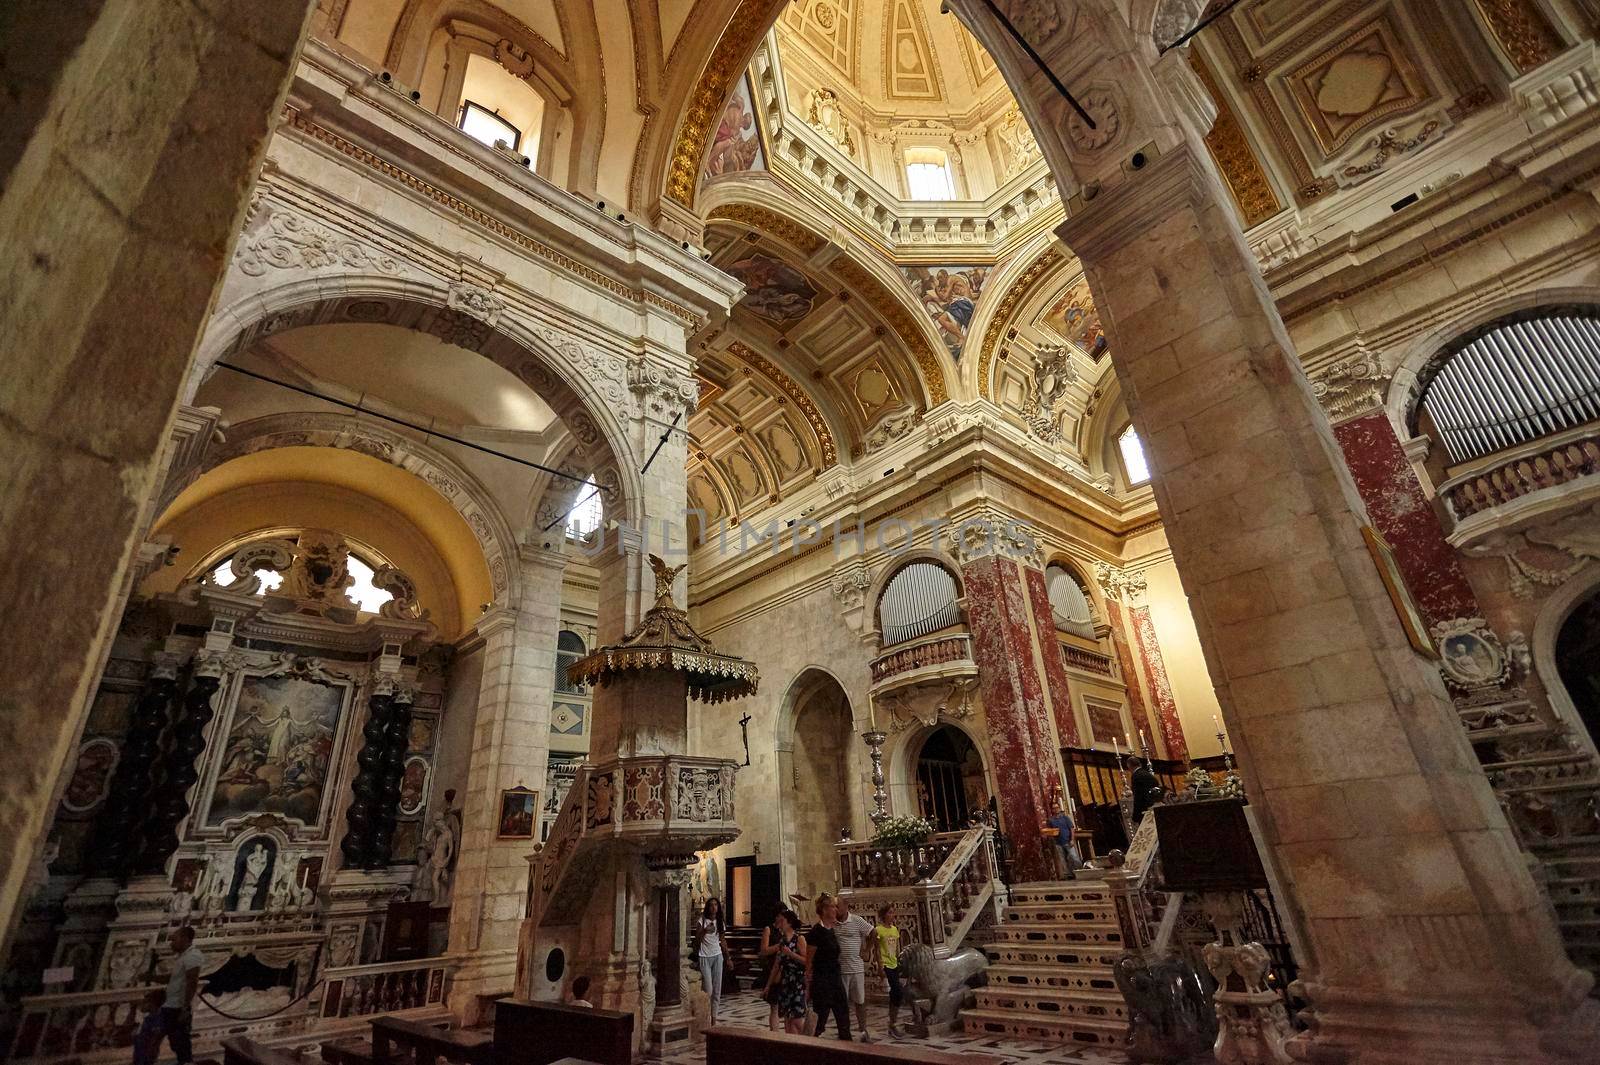 Interior of a Catholic church of Cagliari with its particular architecture and decorations.